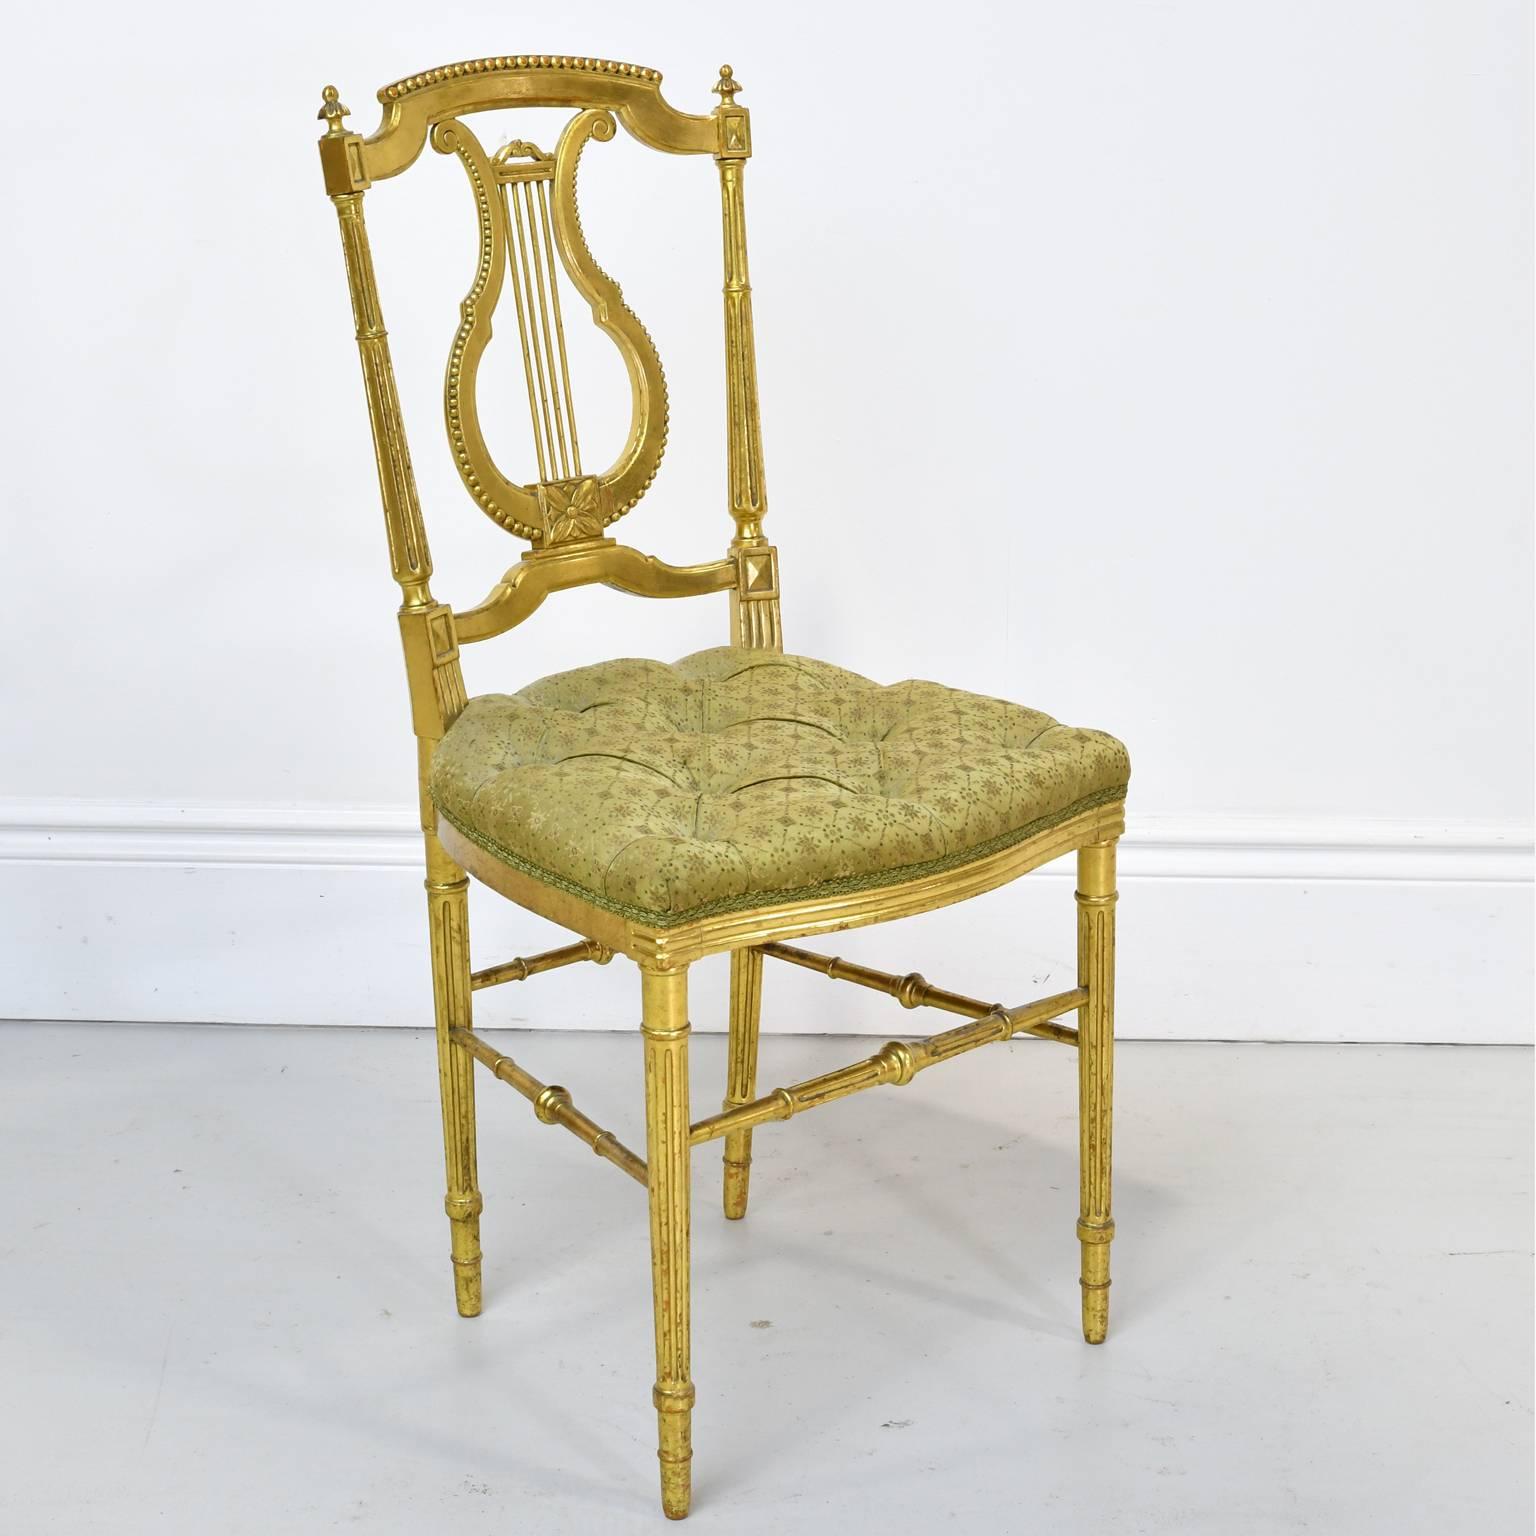 Carved Gilded Louis XVI Style Chair w/ Lyre-Back & Upholstered Seat, France, ca. 1910